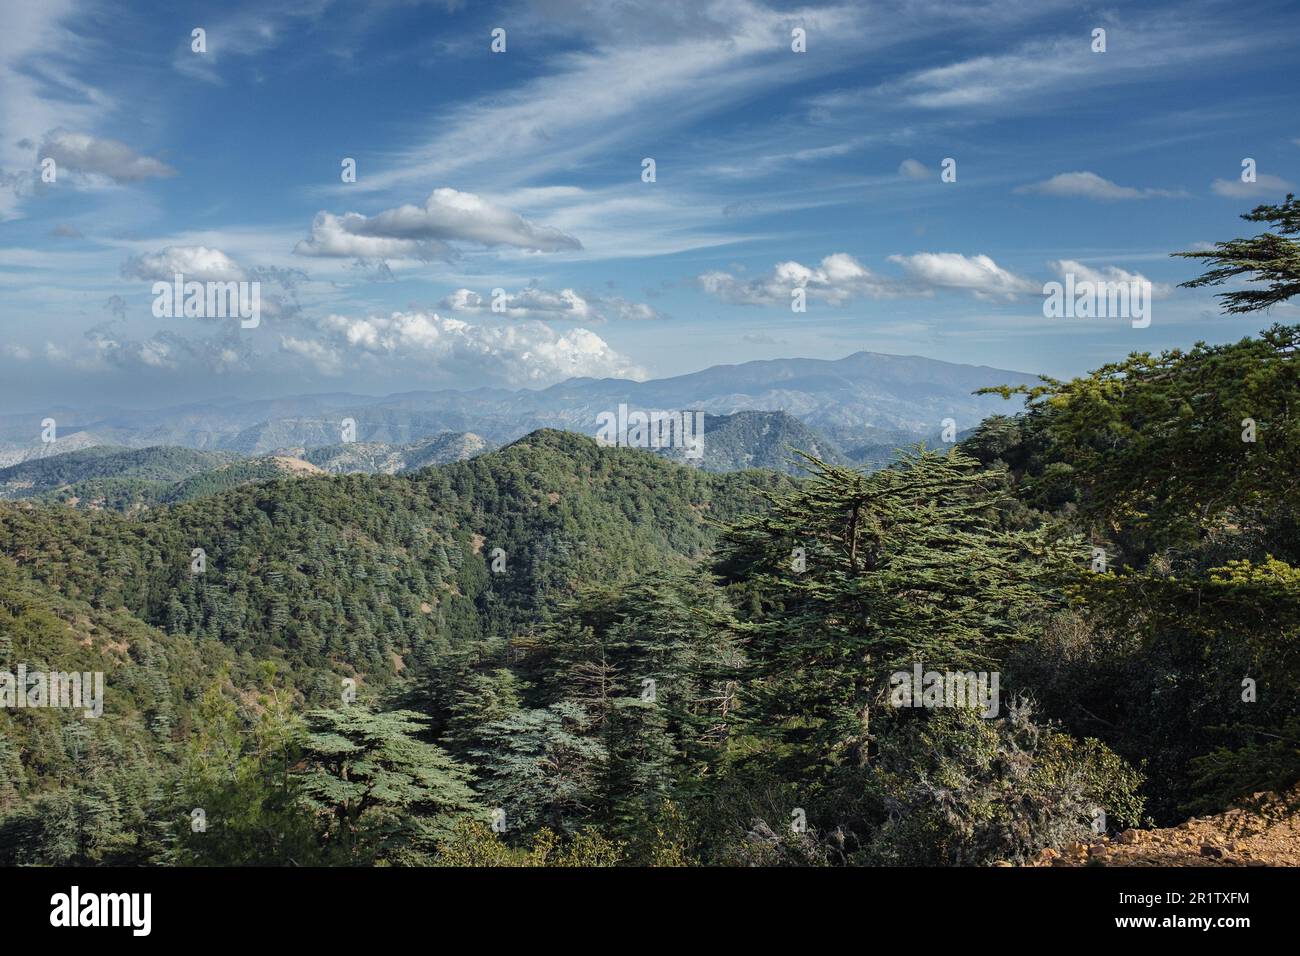 View from Mount Tripylos looking over the Pafos (Paphos) Forest, Cyprus Stock Photo